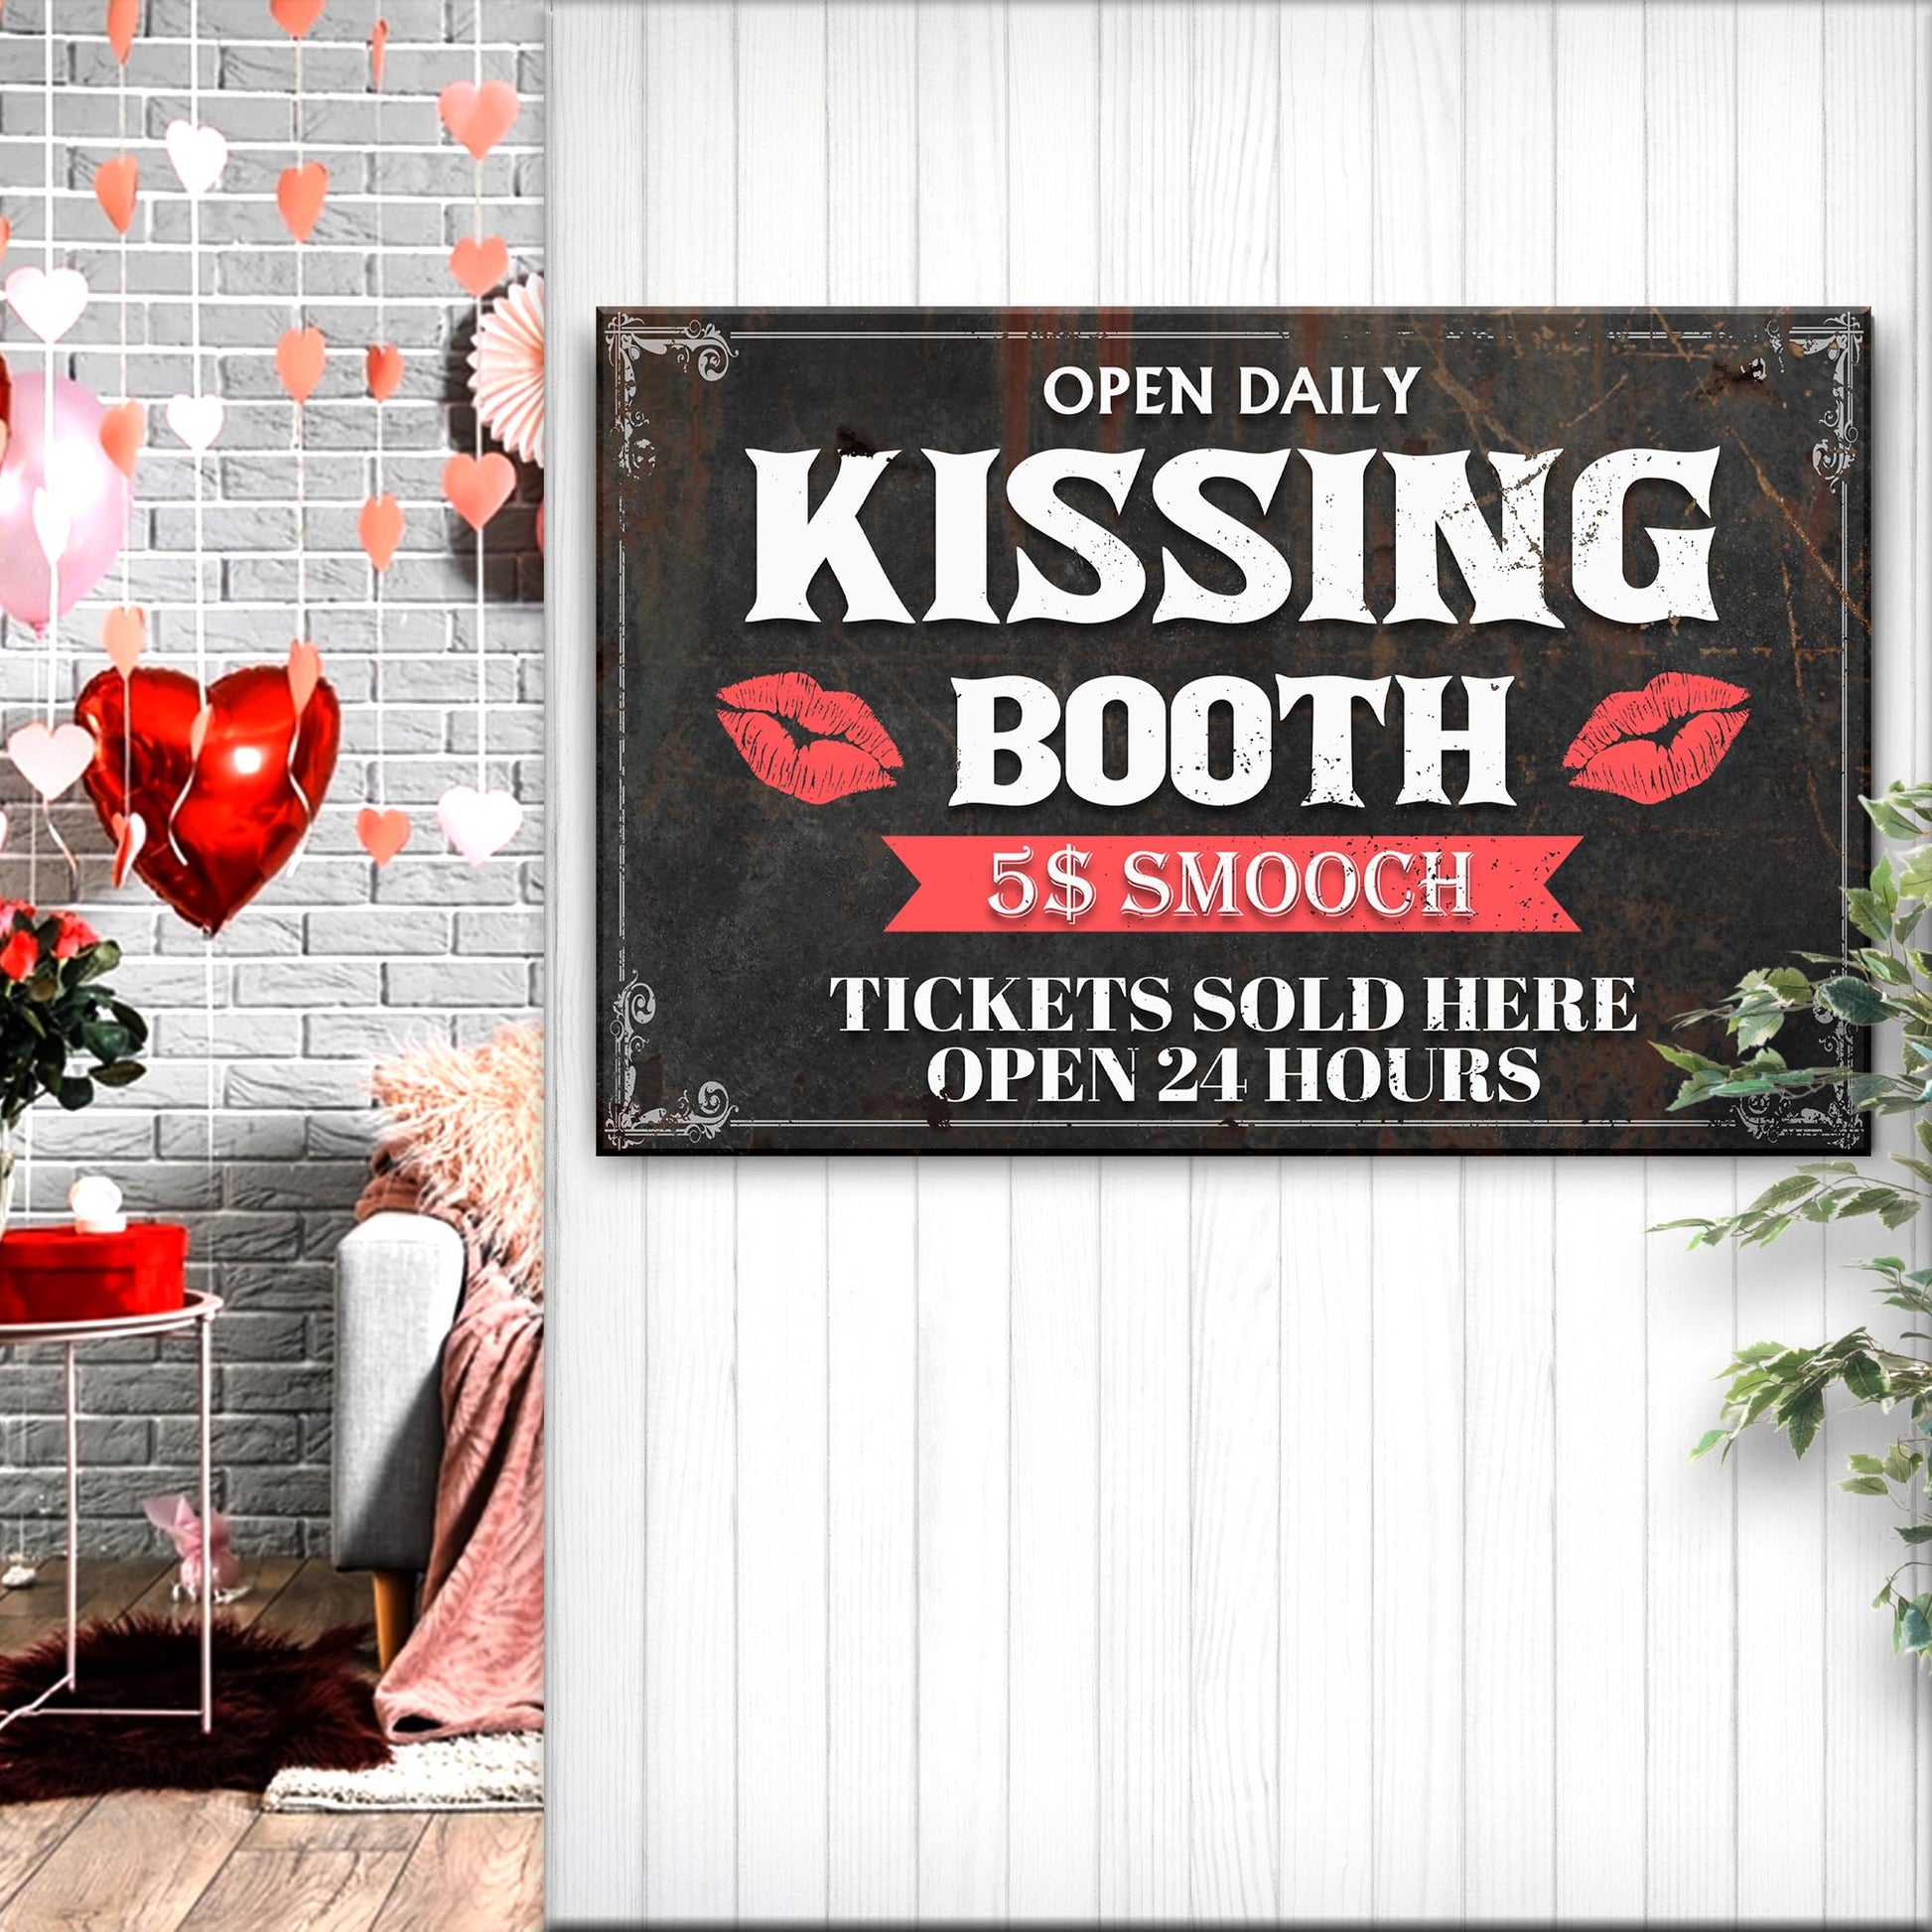 Tickets Sold Here Kissing Booth Sign Style 1 - Image by Tailored Canvases